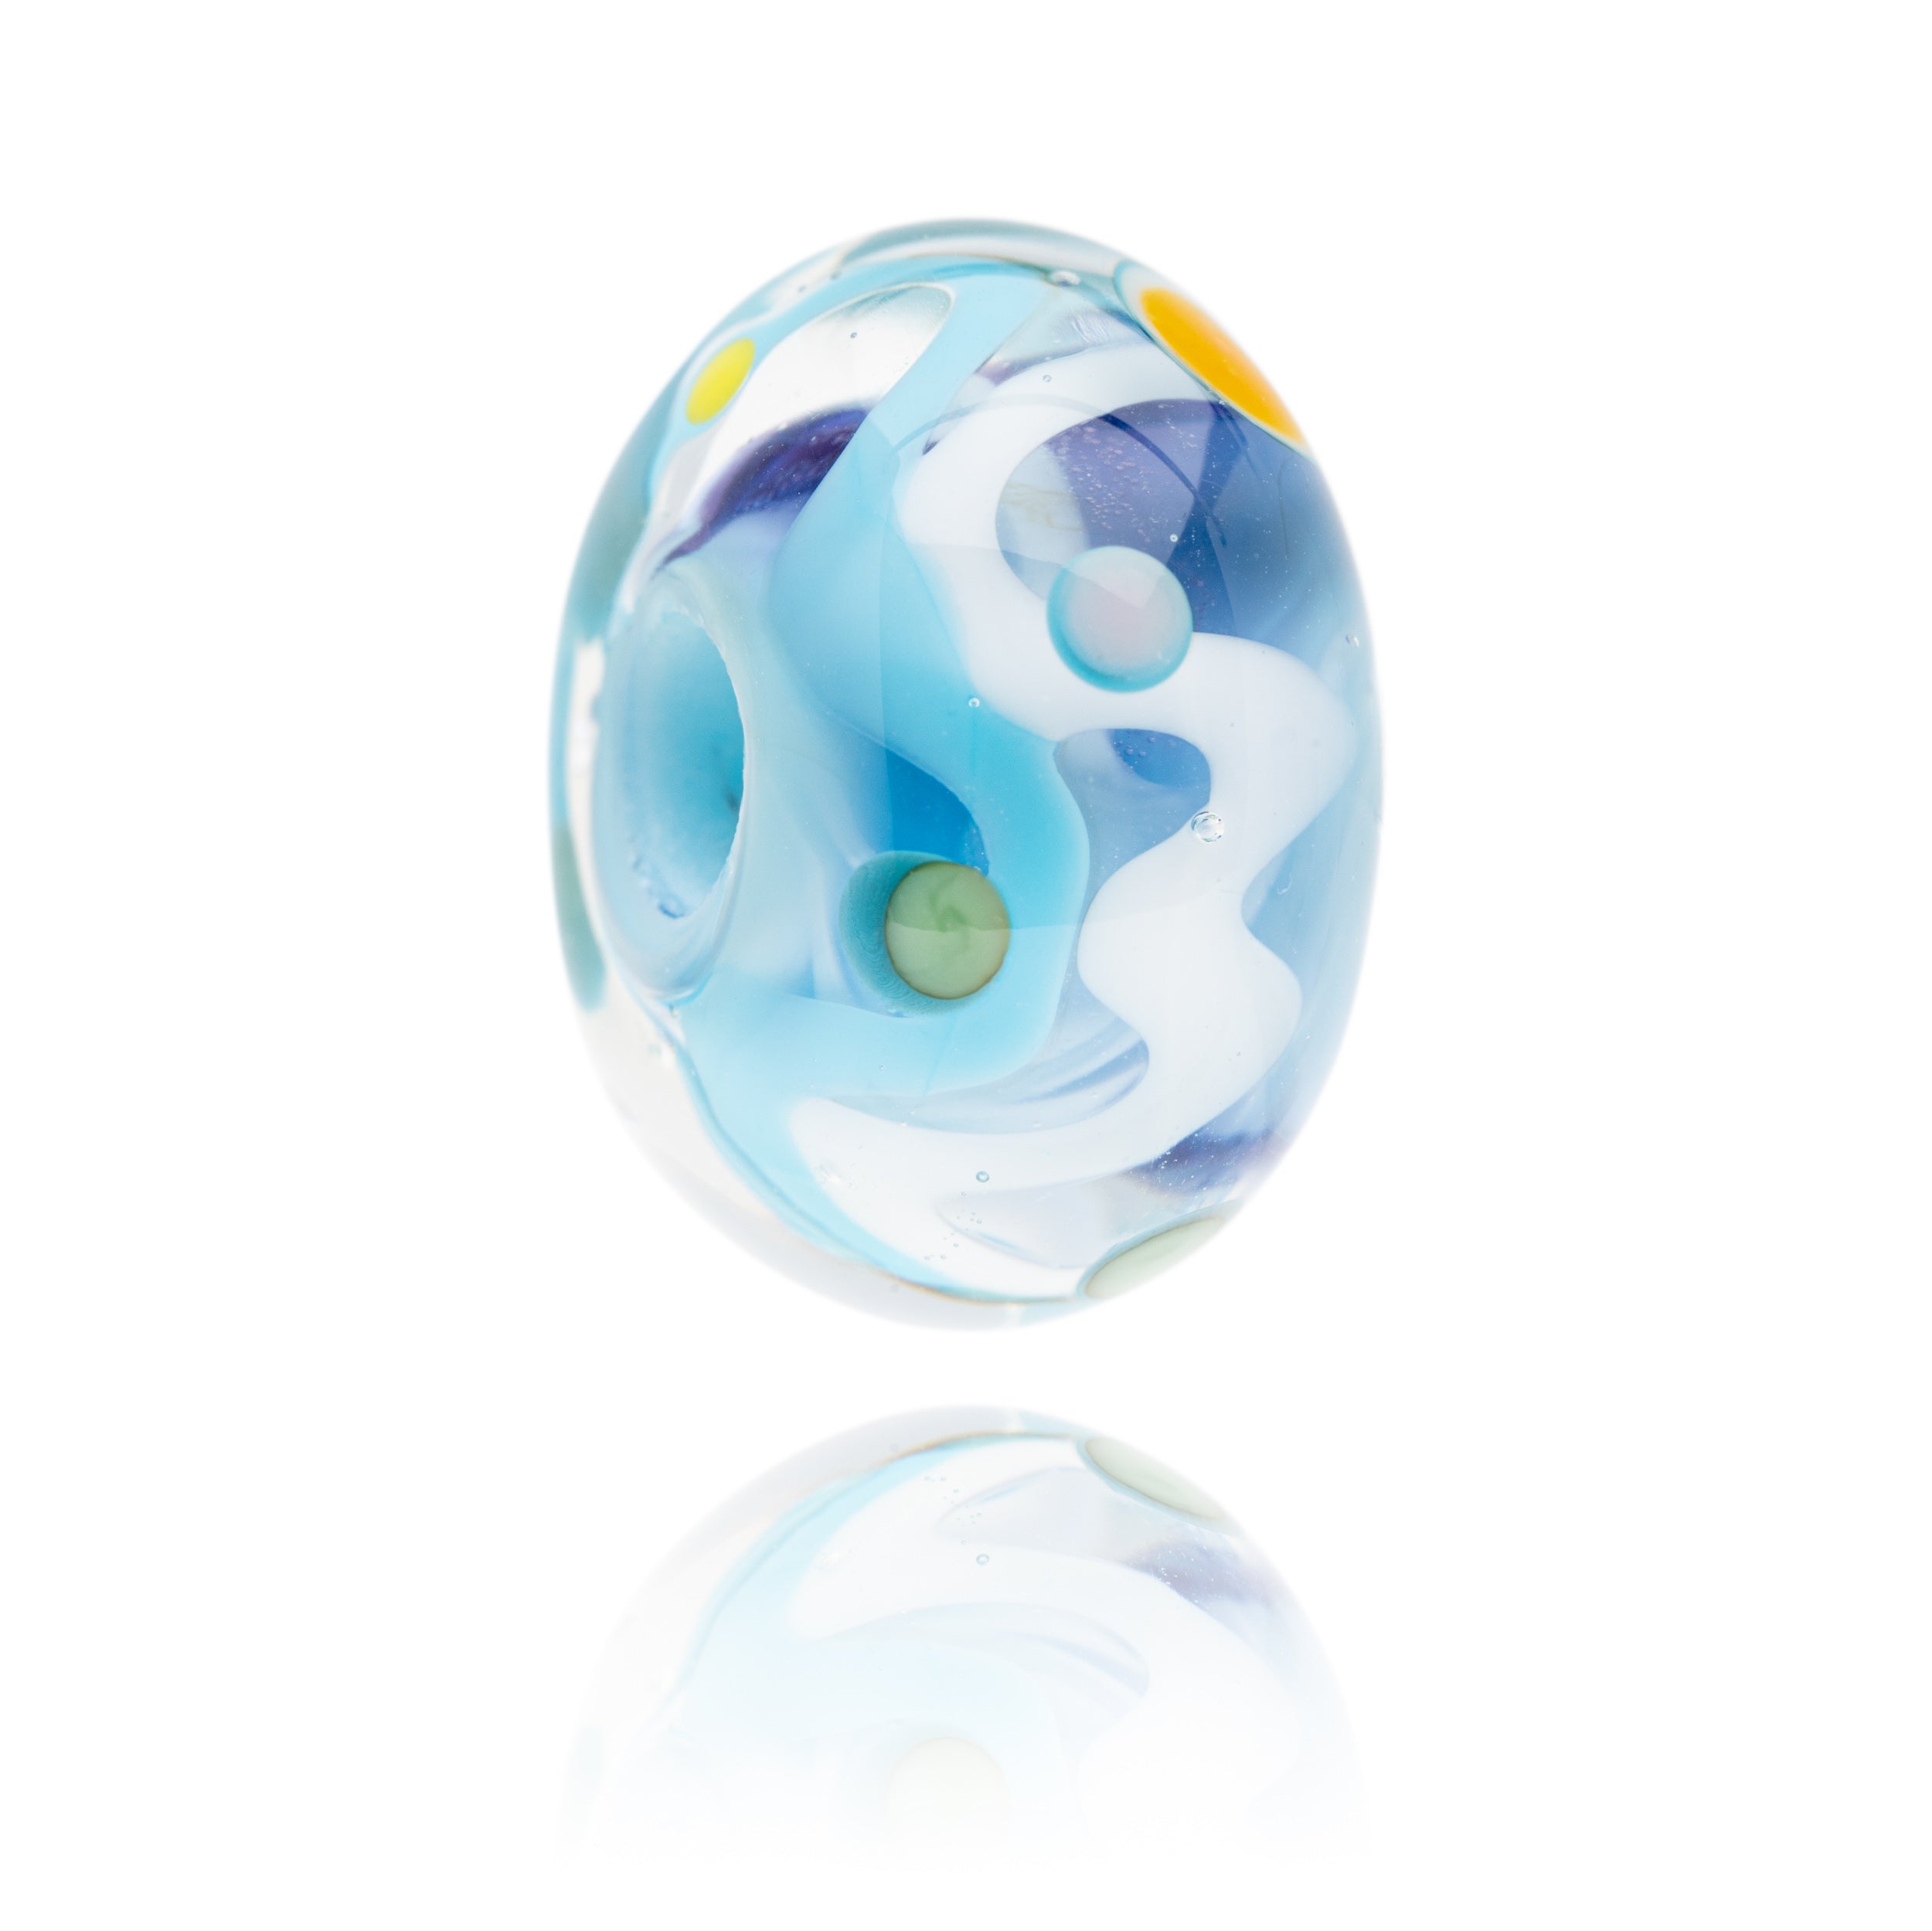 Colourful swirling blue glass bead collaborating with Steve PP art.